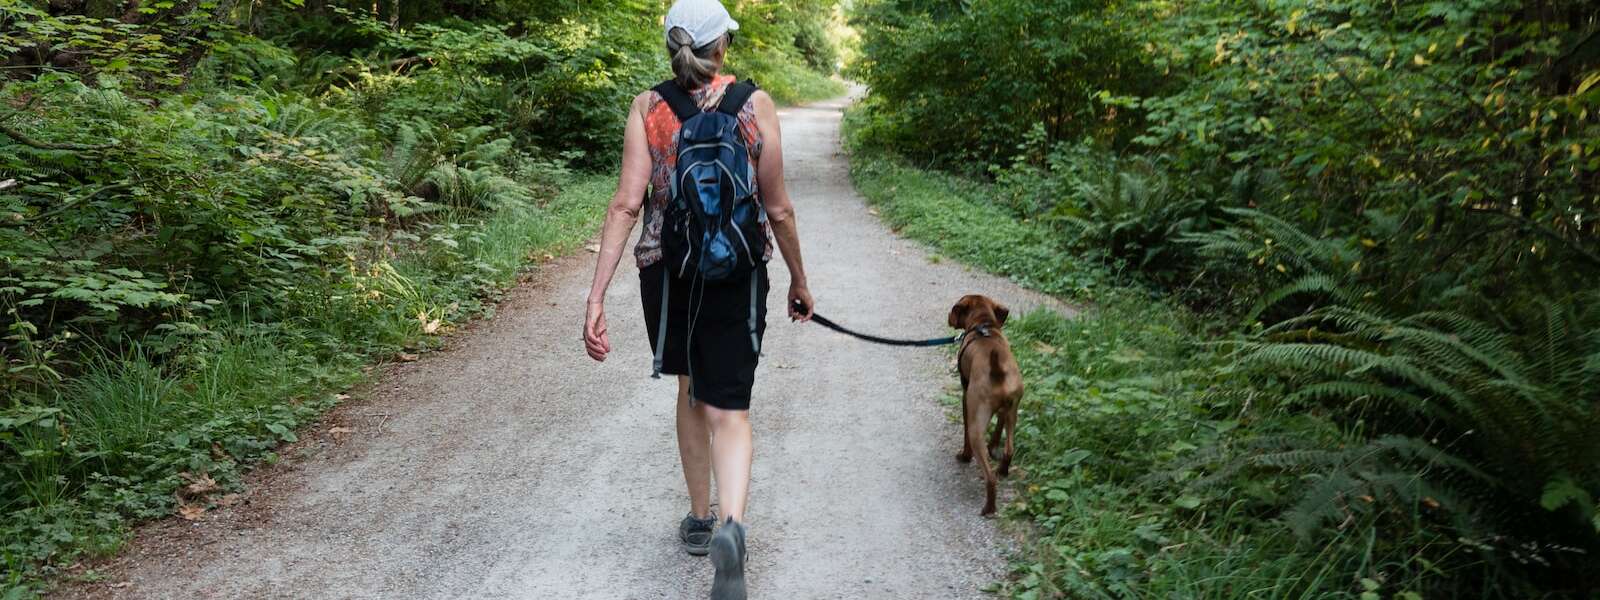 A person walks on a forest path with a brown dog